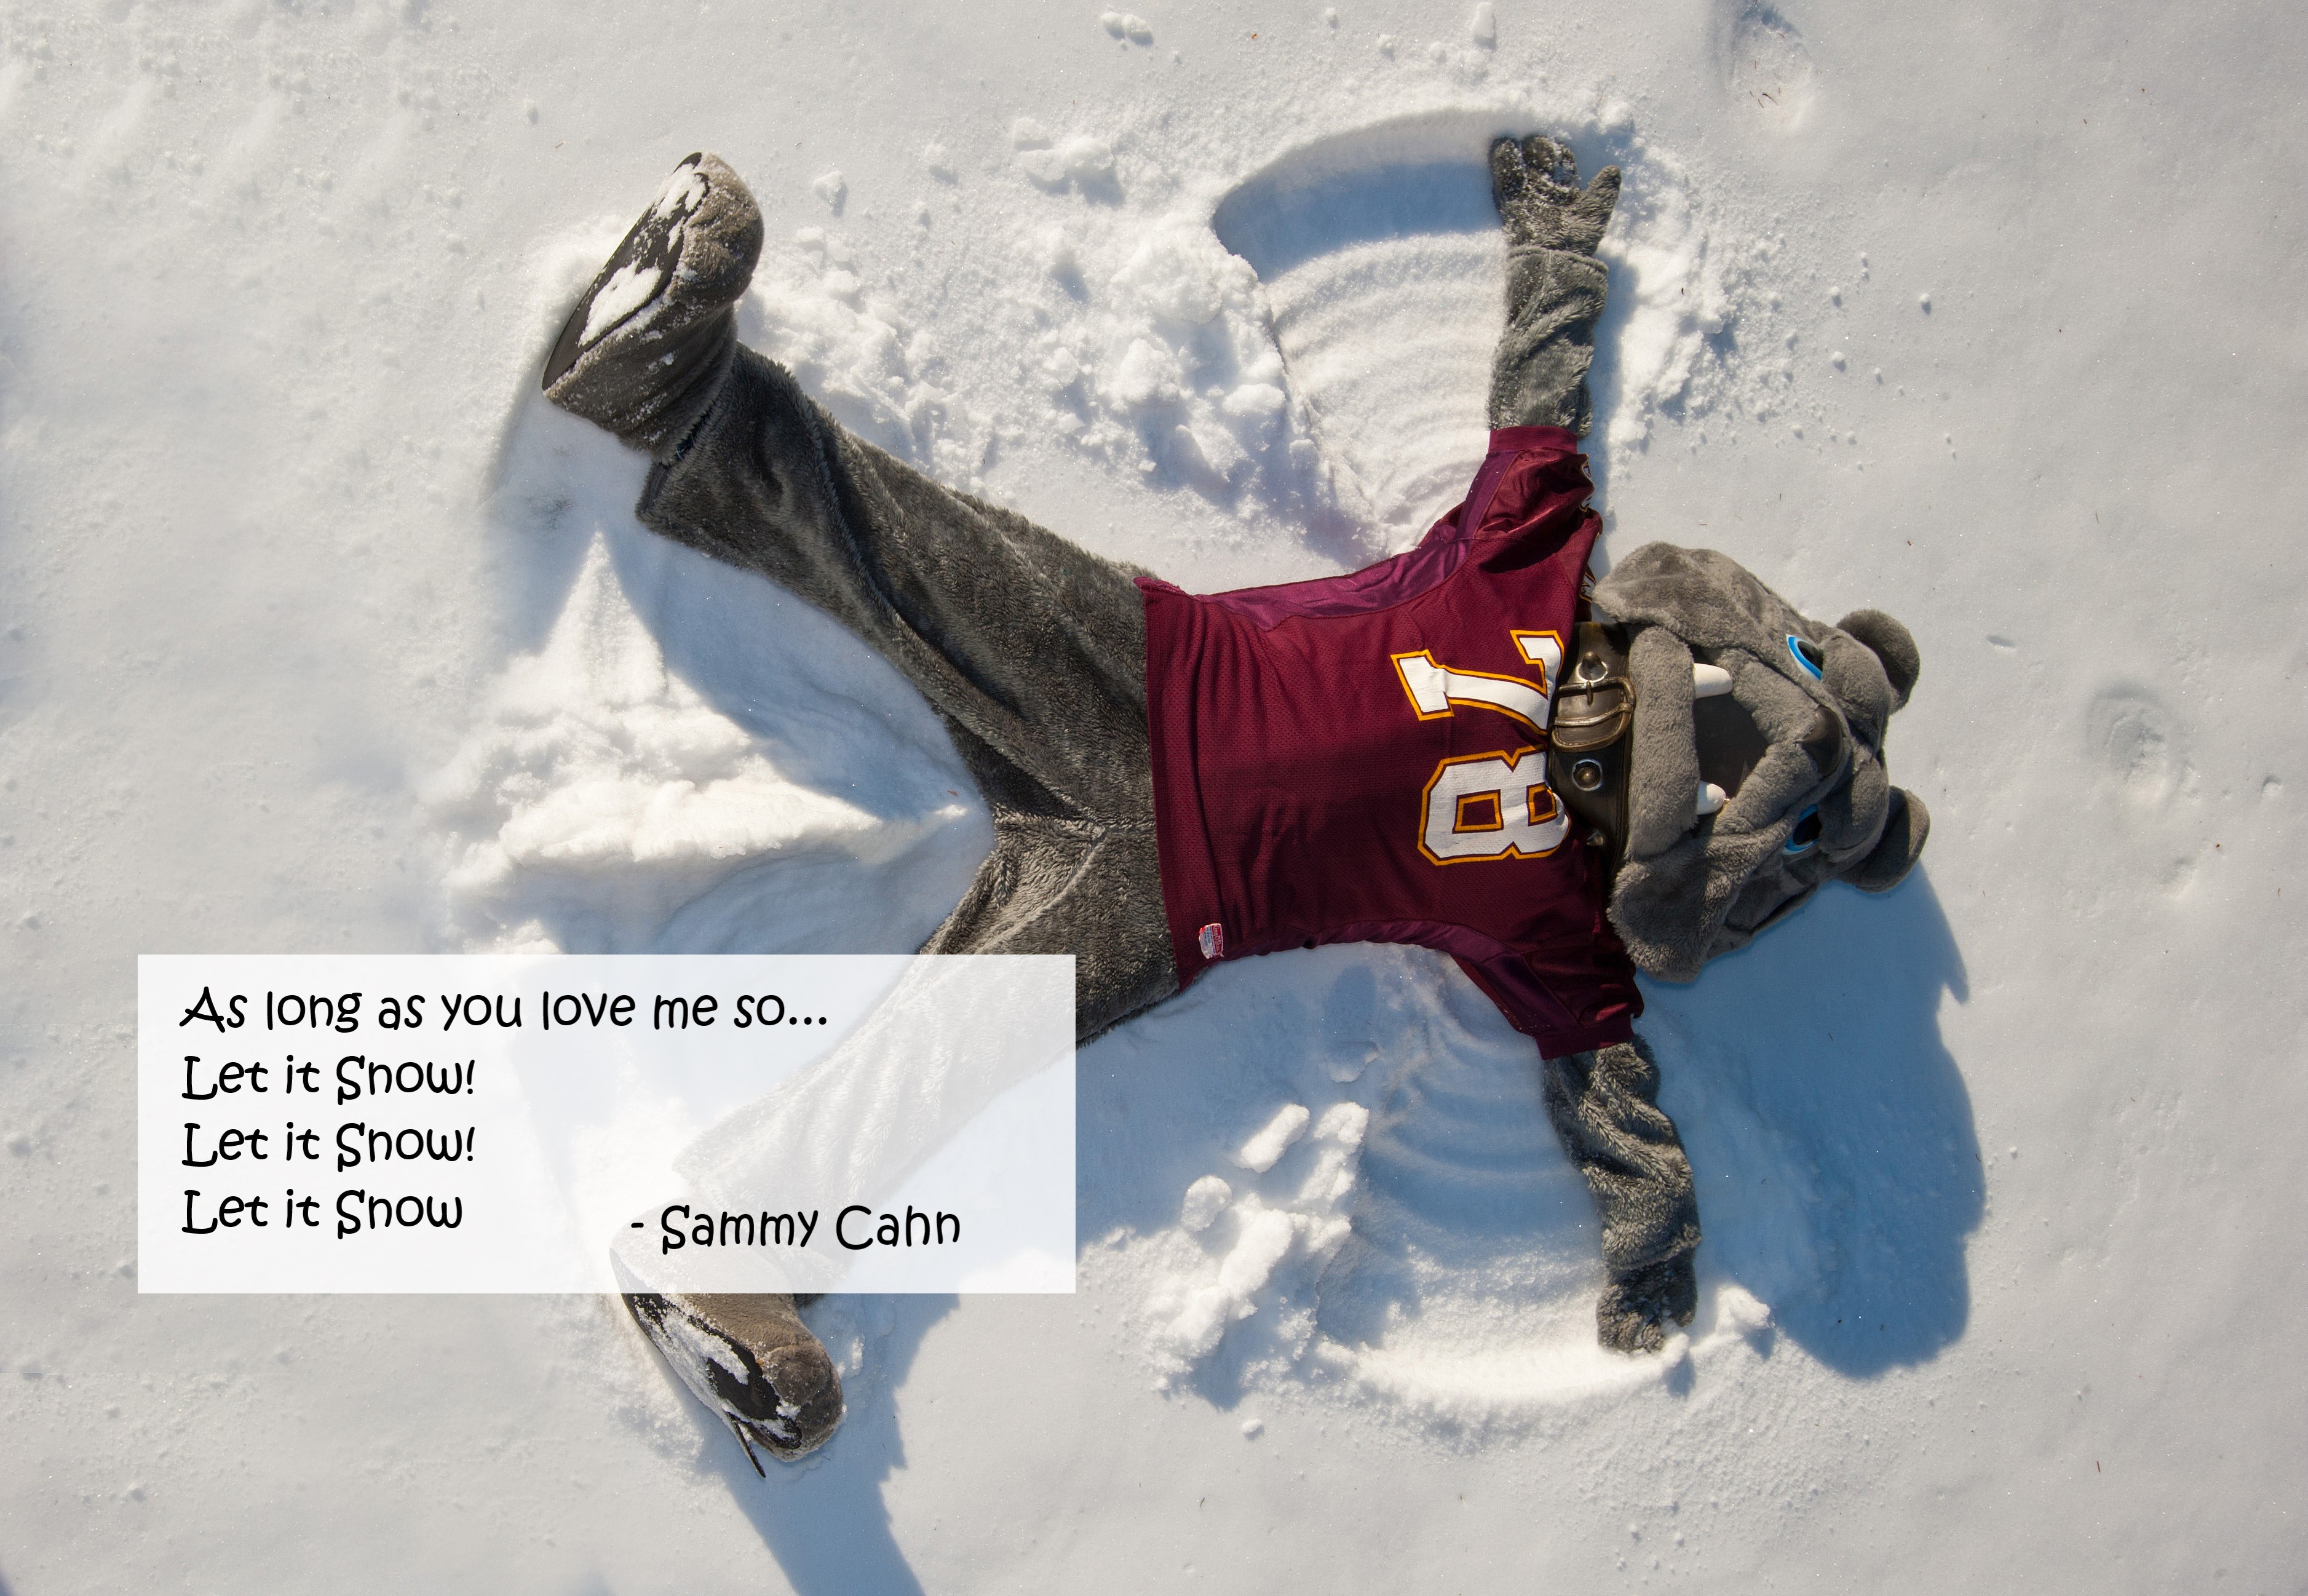 Champ making a snow angel with the lyrics to "Let it Snow!" by Sammy Cahn